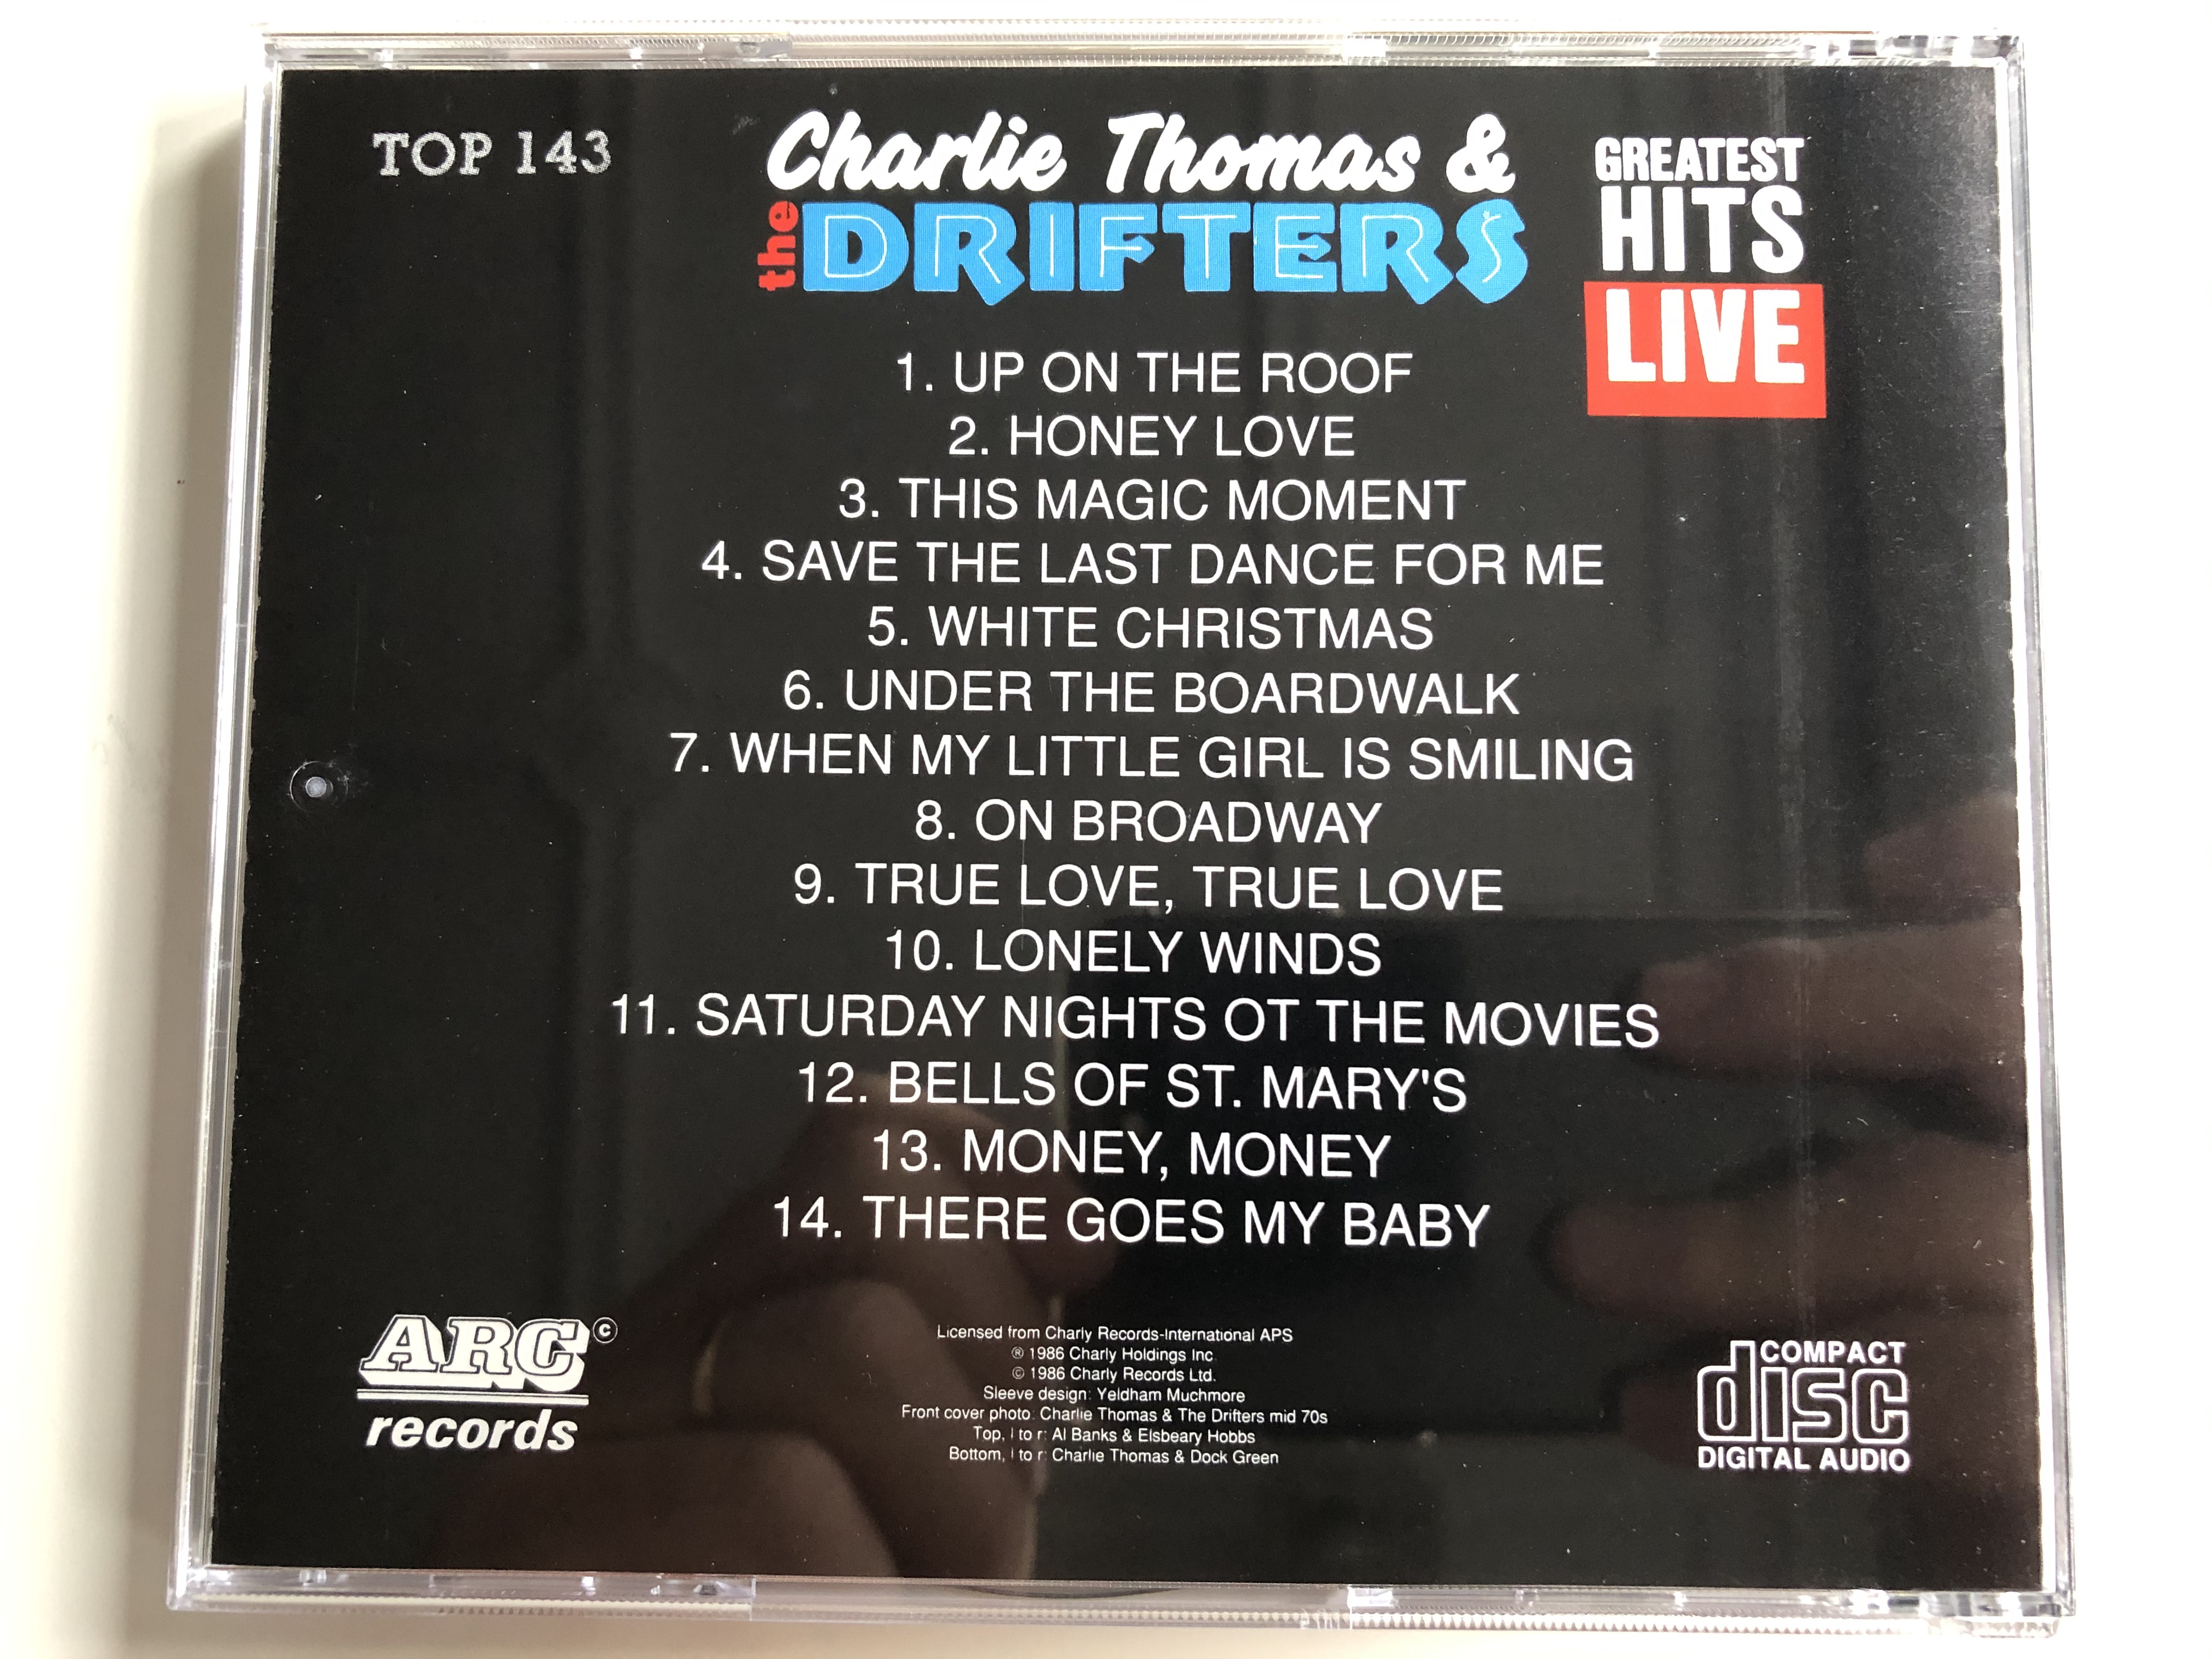 charlie-thomas-the-drifters-greatest-hits-live-arc-records-audio-cd-1986-top-143-4-.jpg